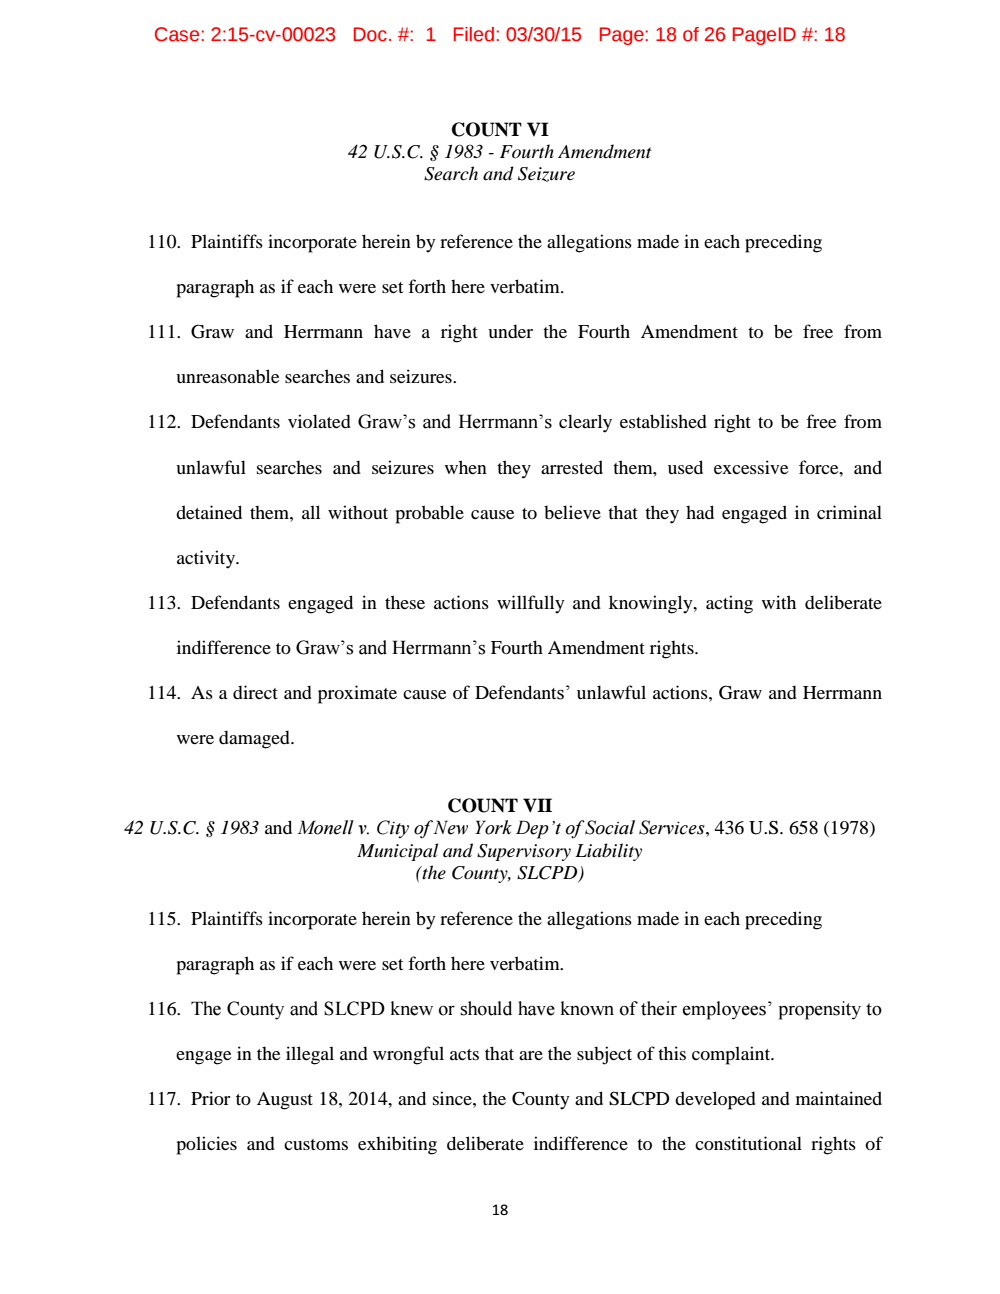 Page 18 from Complaint by <em>Intercept</em> Journalist Against St. Louis Police and County